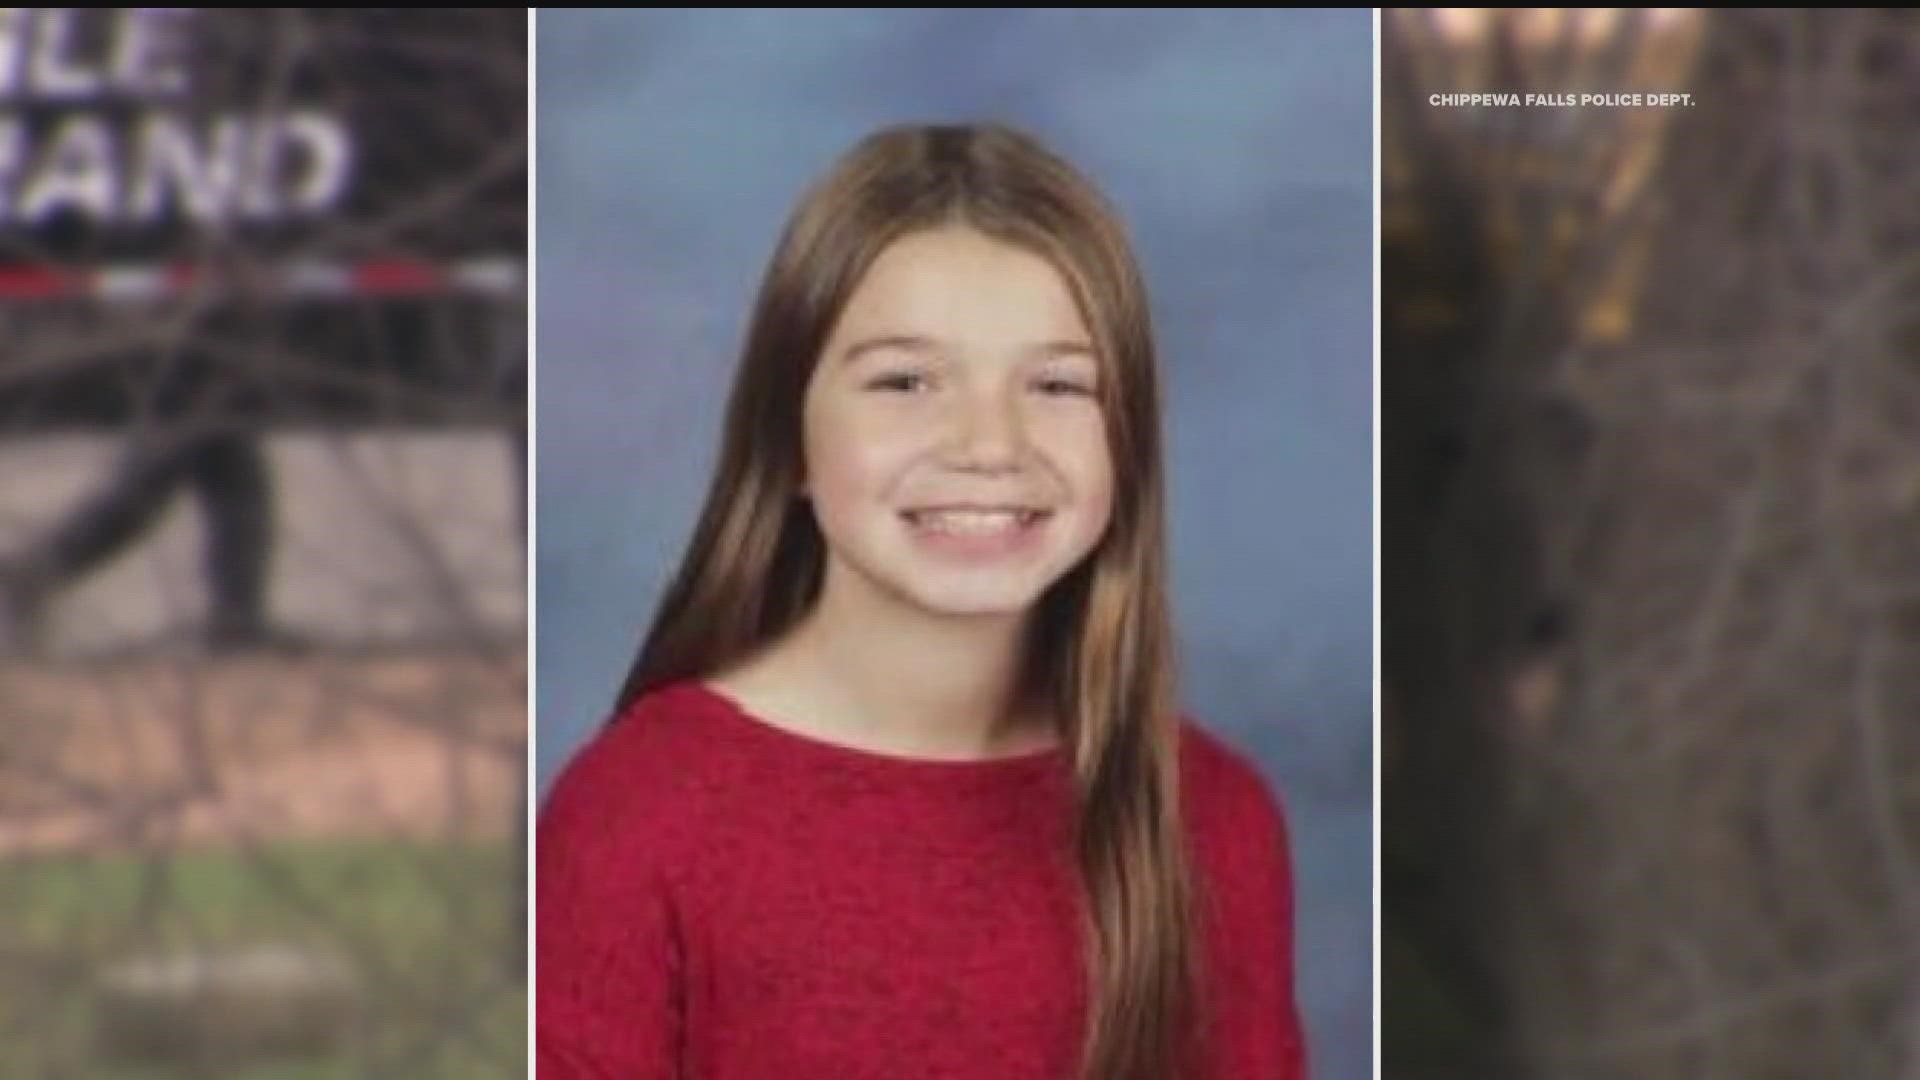 During a 12-hour search for Lily Peters, police did not issue an Amber Alert because it did not fit state criteria based on federal guidelines.